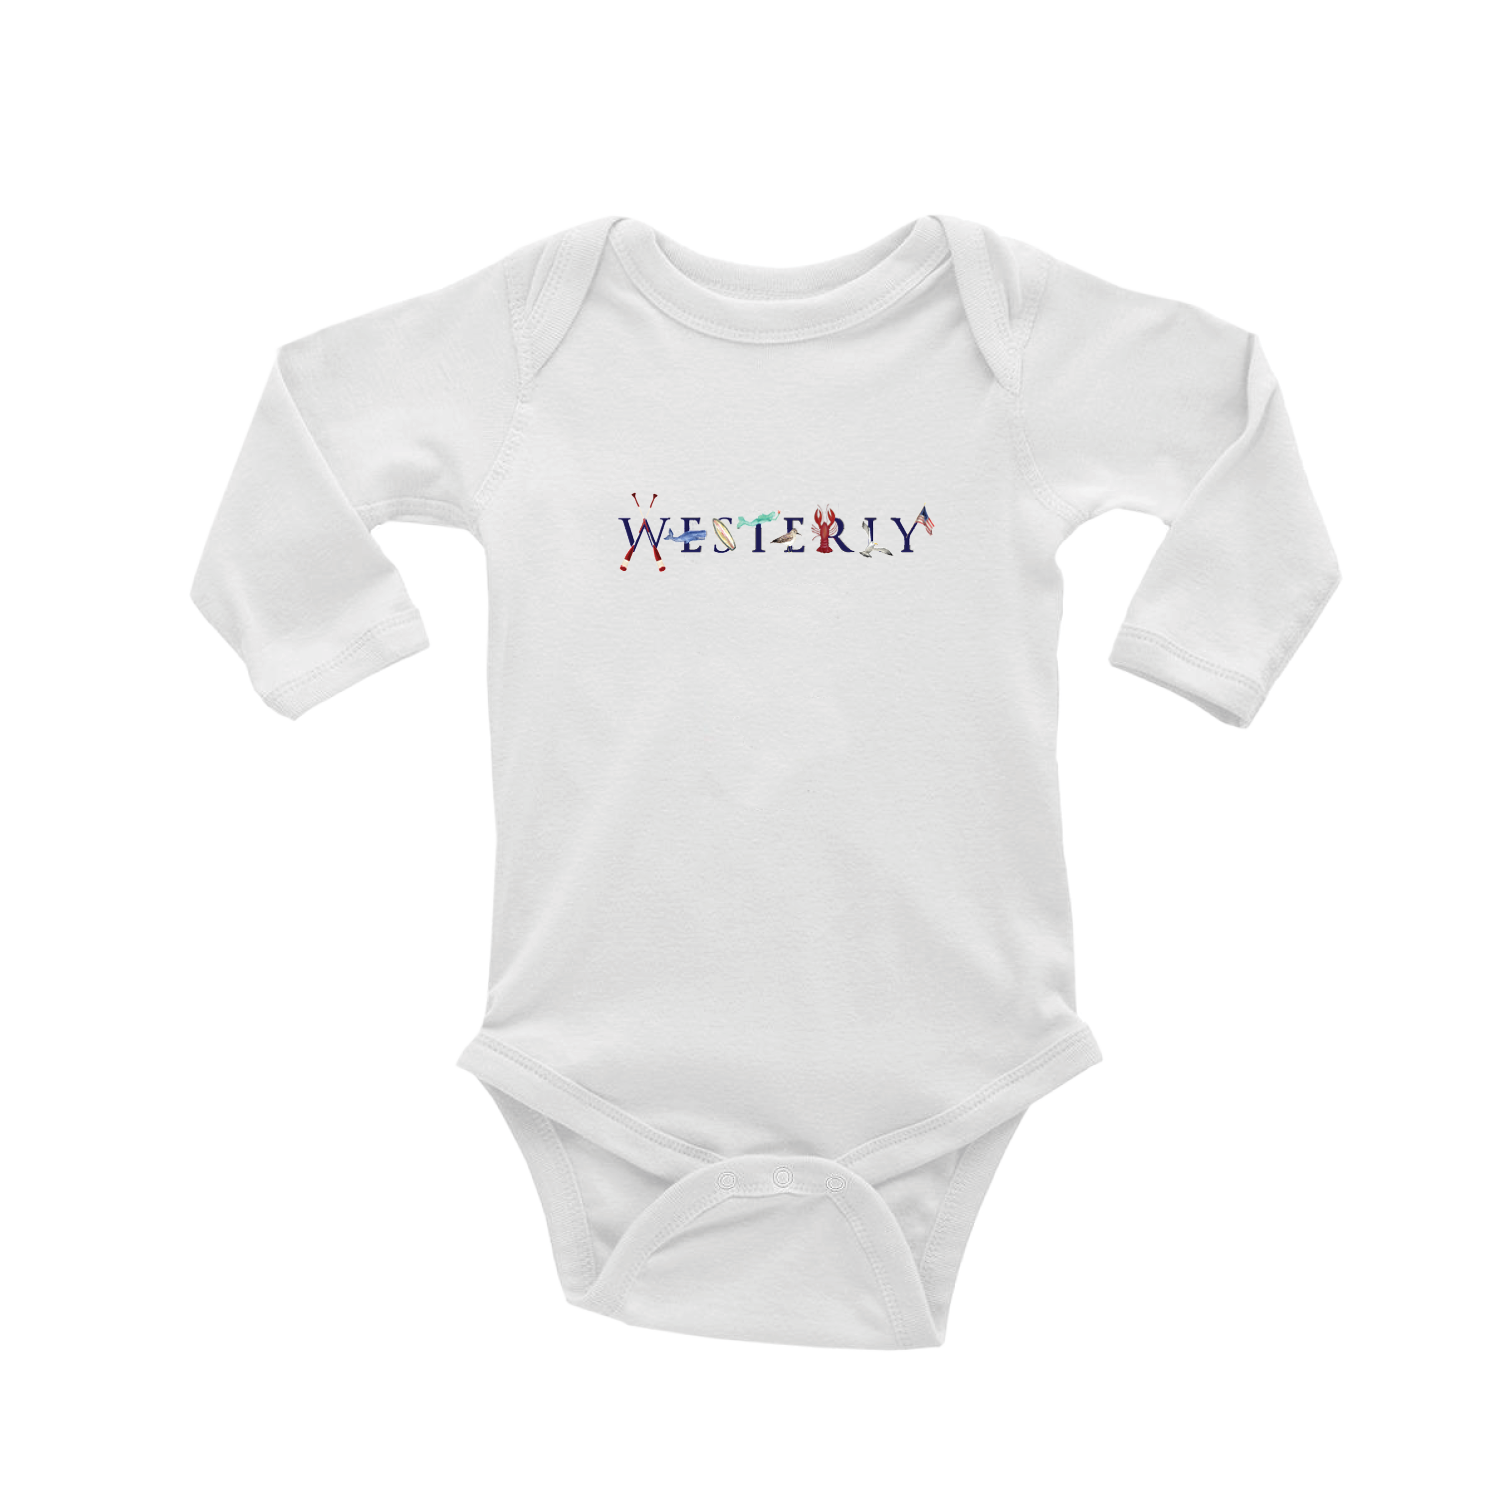 Westerly baby snap up long sleeve